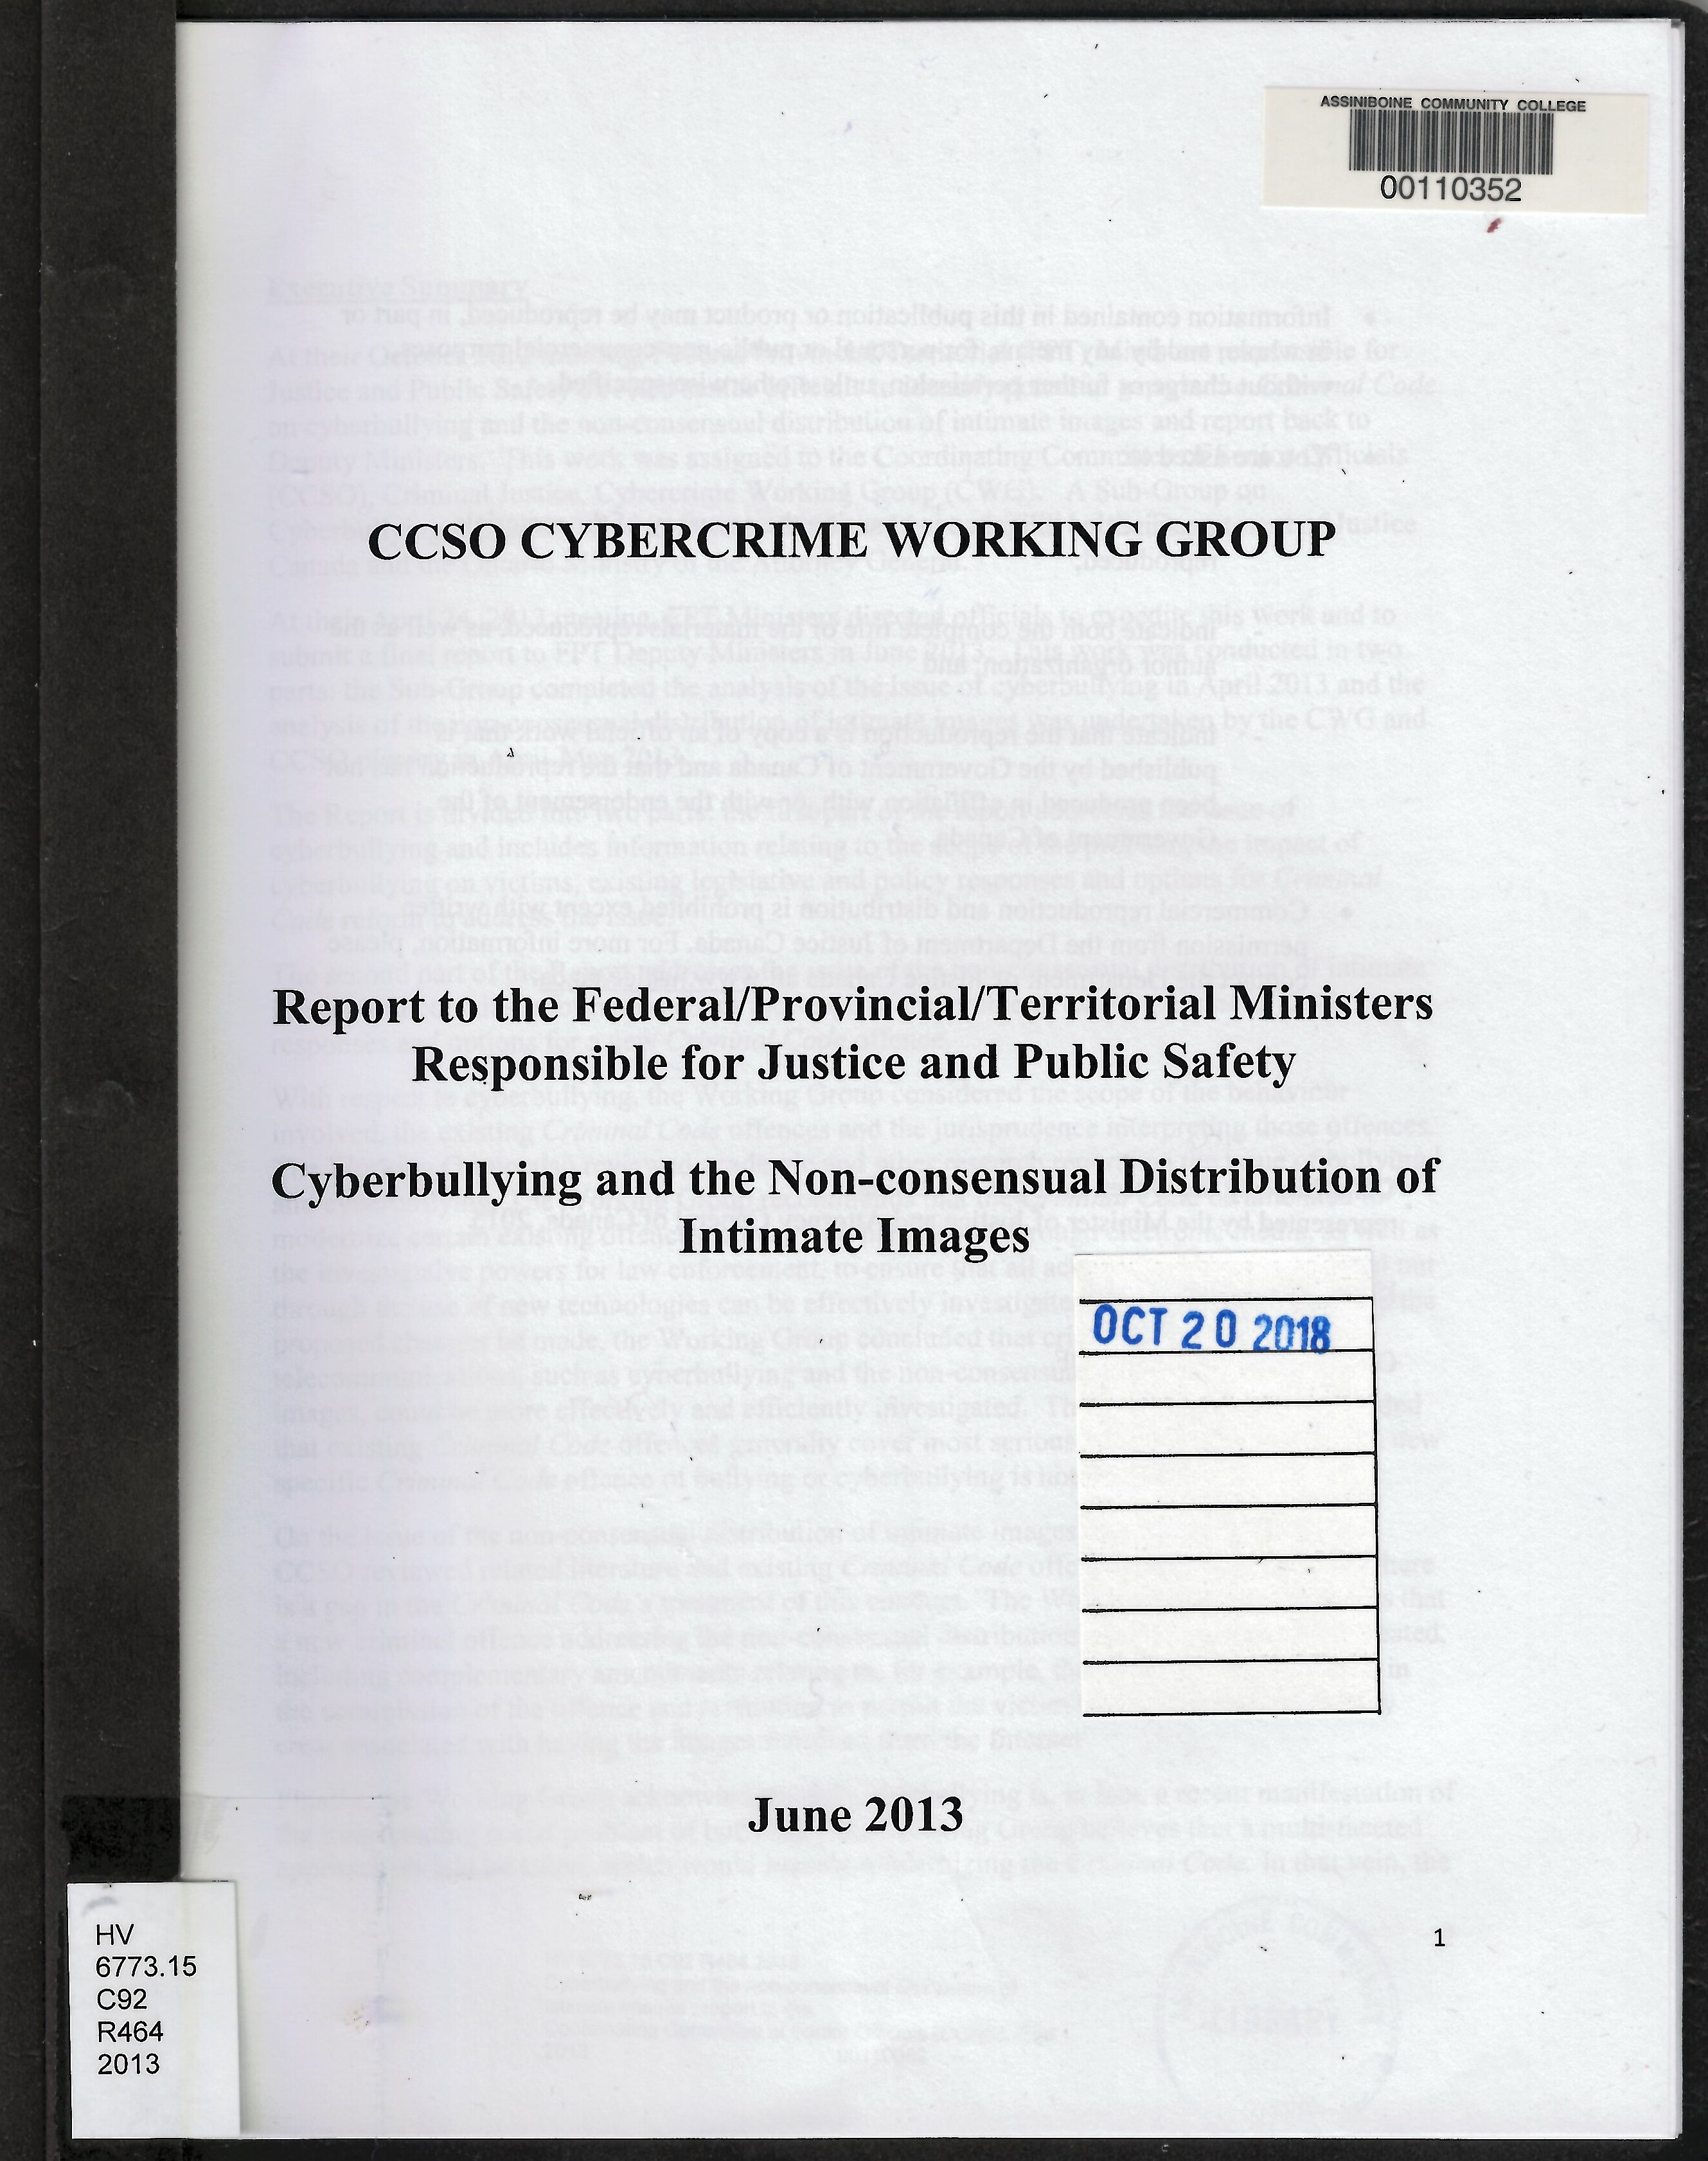 Cyberbullying and the non-consensual distribution of intimate images : report to the Federal/Provincial/Territorial Ministers Responsible for Justice and Public Safety